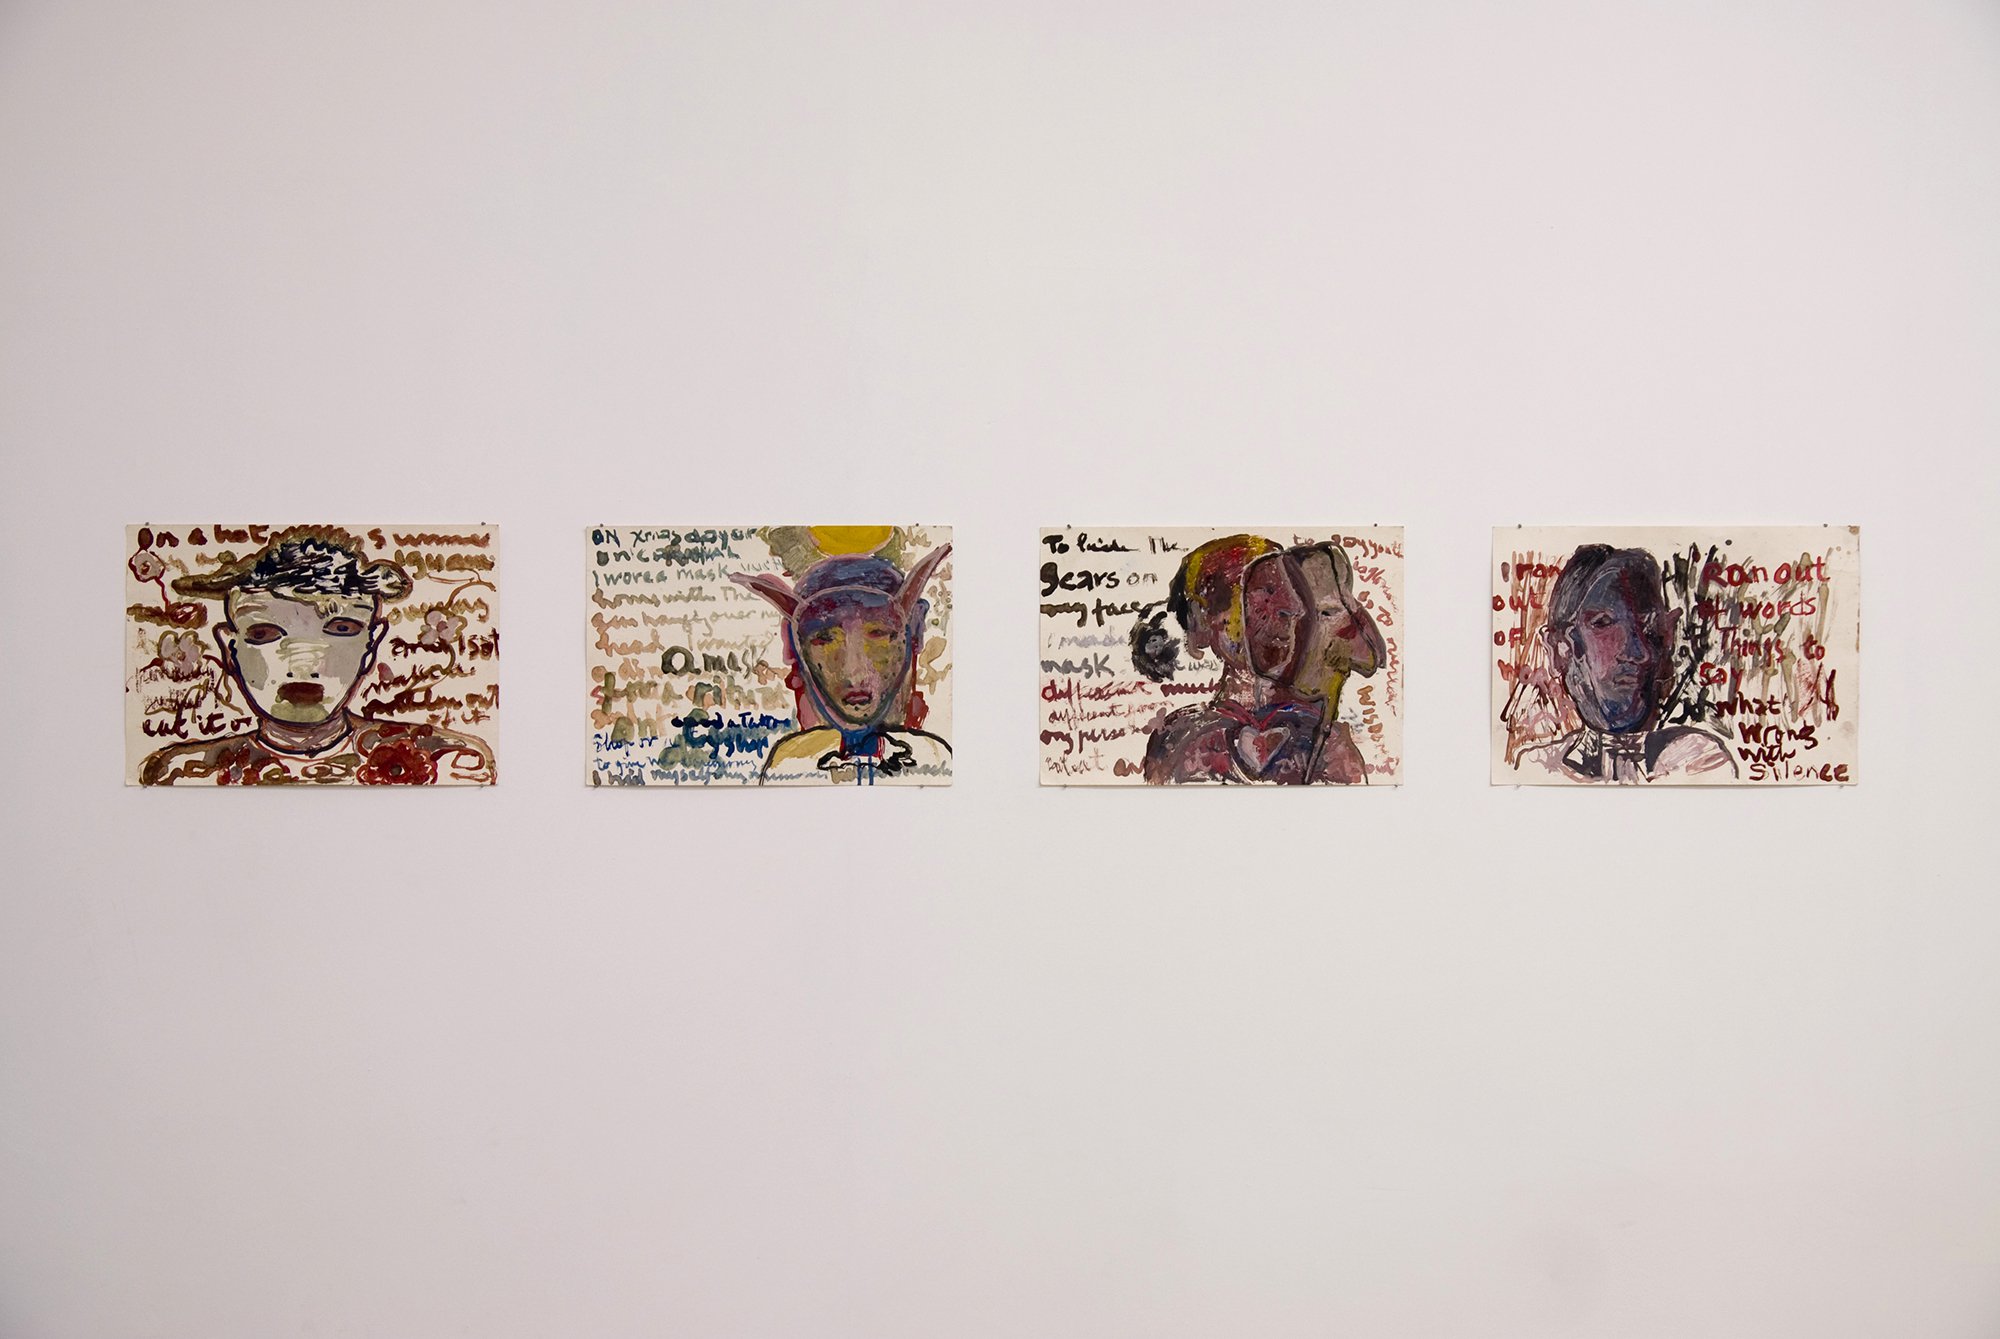 Anna Boghiguian, I sowed gardens in my soul, I drew gardens on my body, I had my nightmares engraved on my face, I cried and I laughed, I became part of humanity, wax and watercolors on paper, 42 x 29.5cm, 2009. Installation view, Hand in Hand, Rodeo, Istanbul, 2009 – 2010